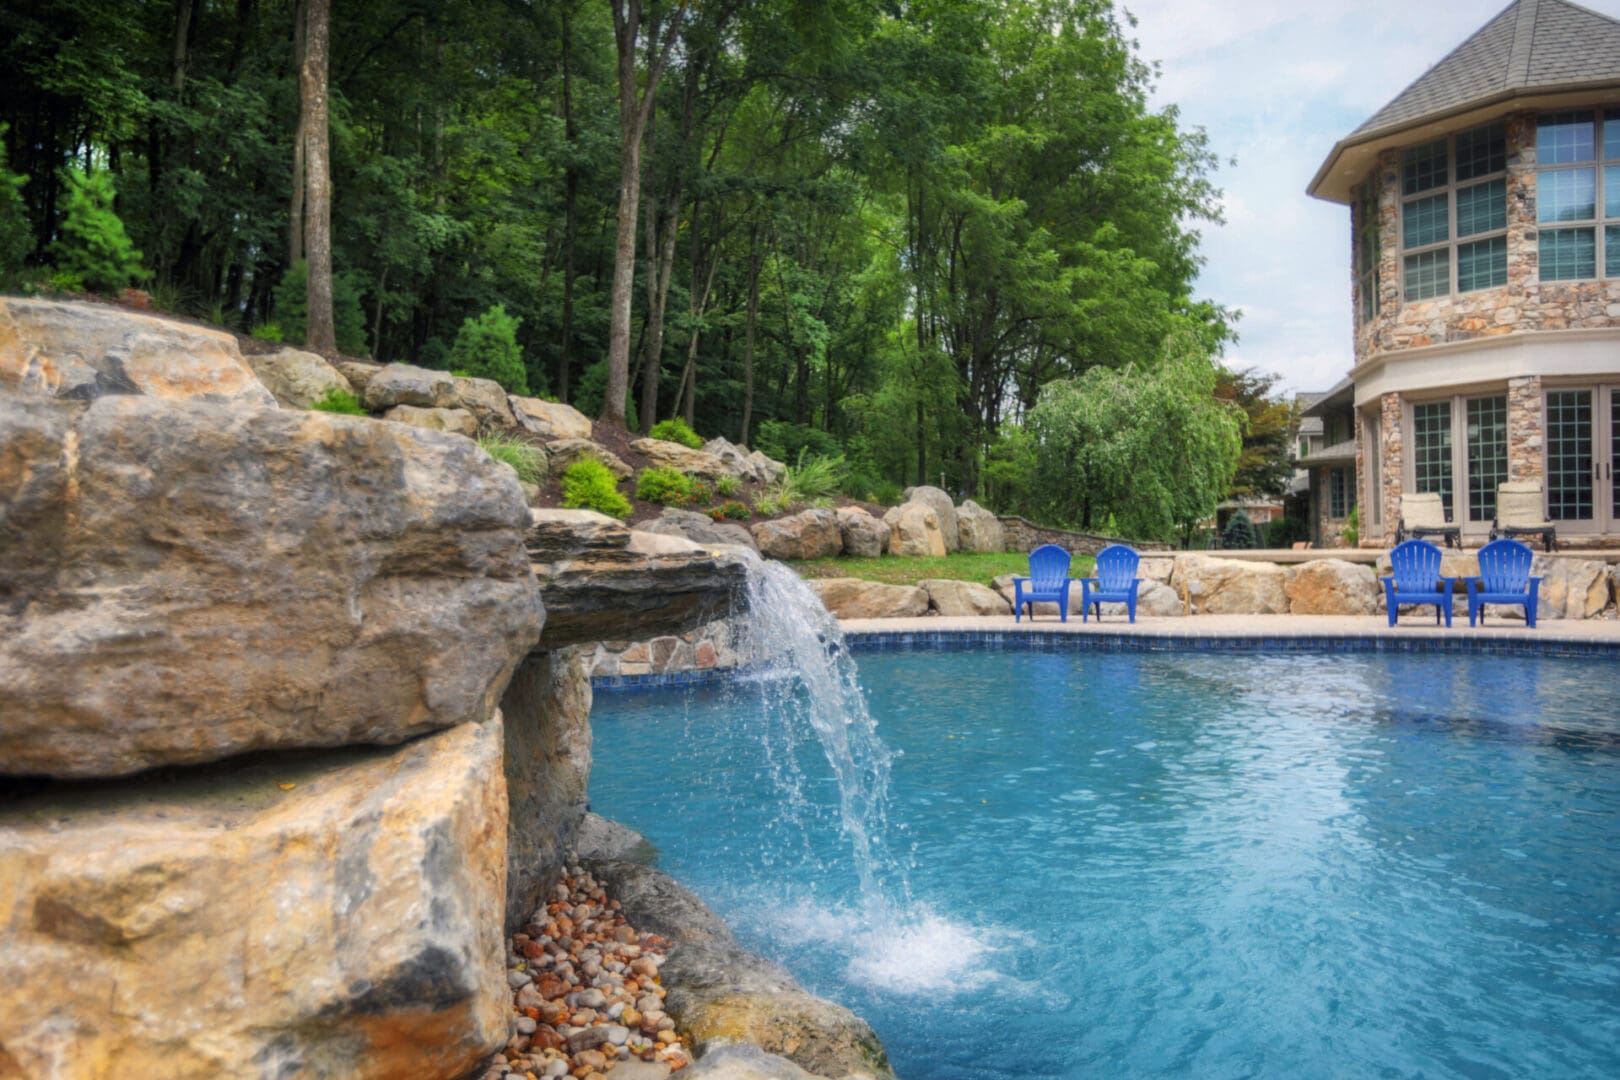 A pool with water features including a waterfall and rocks.